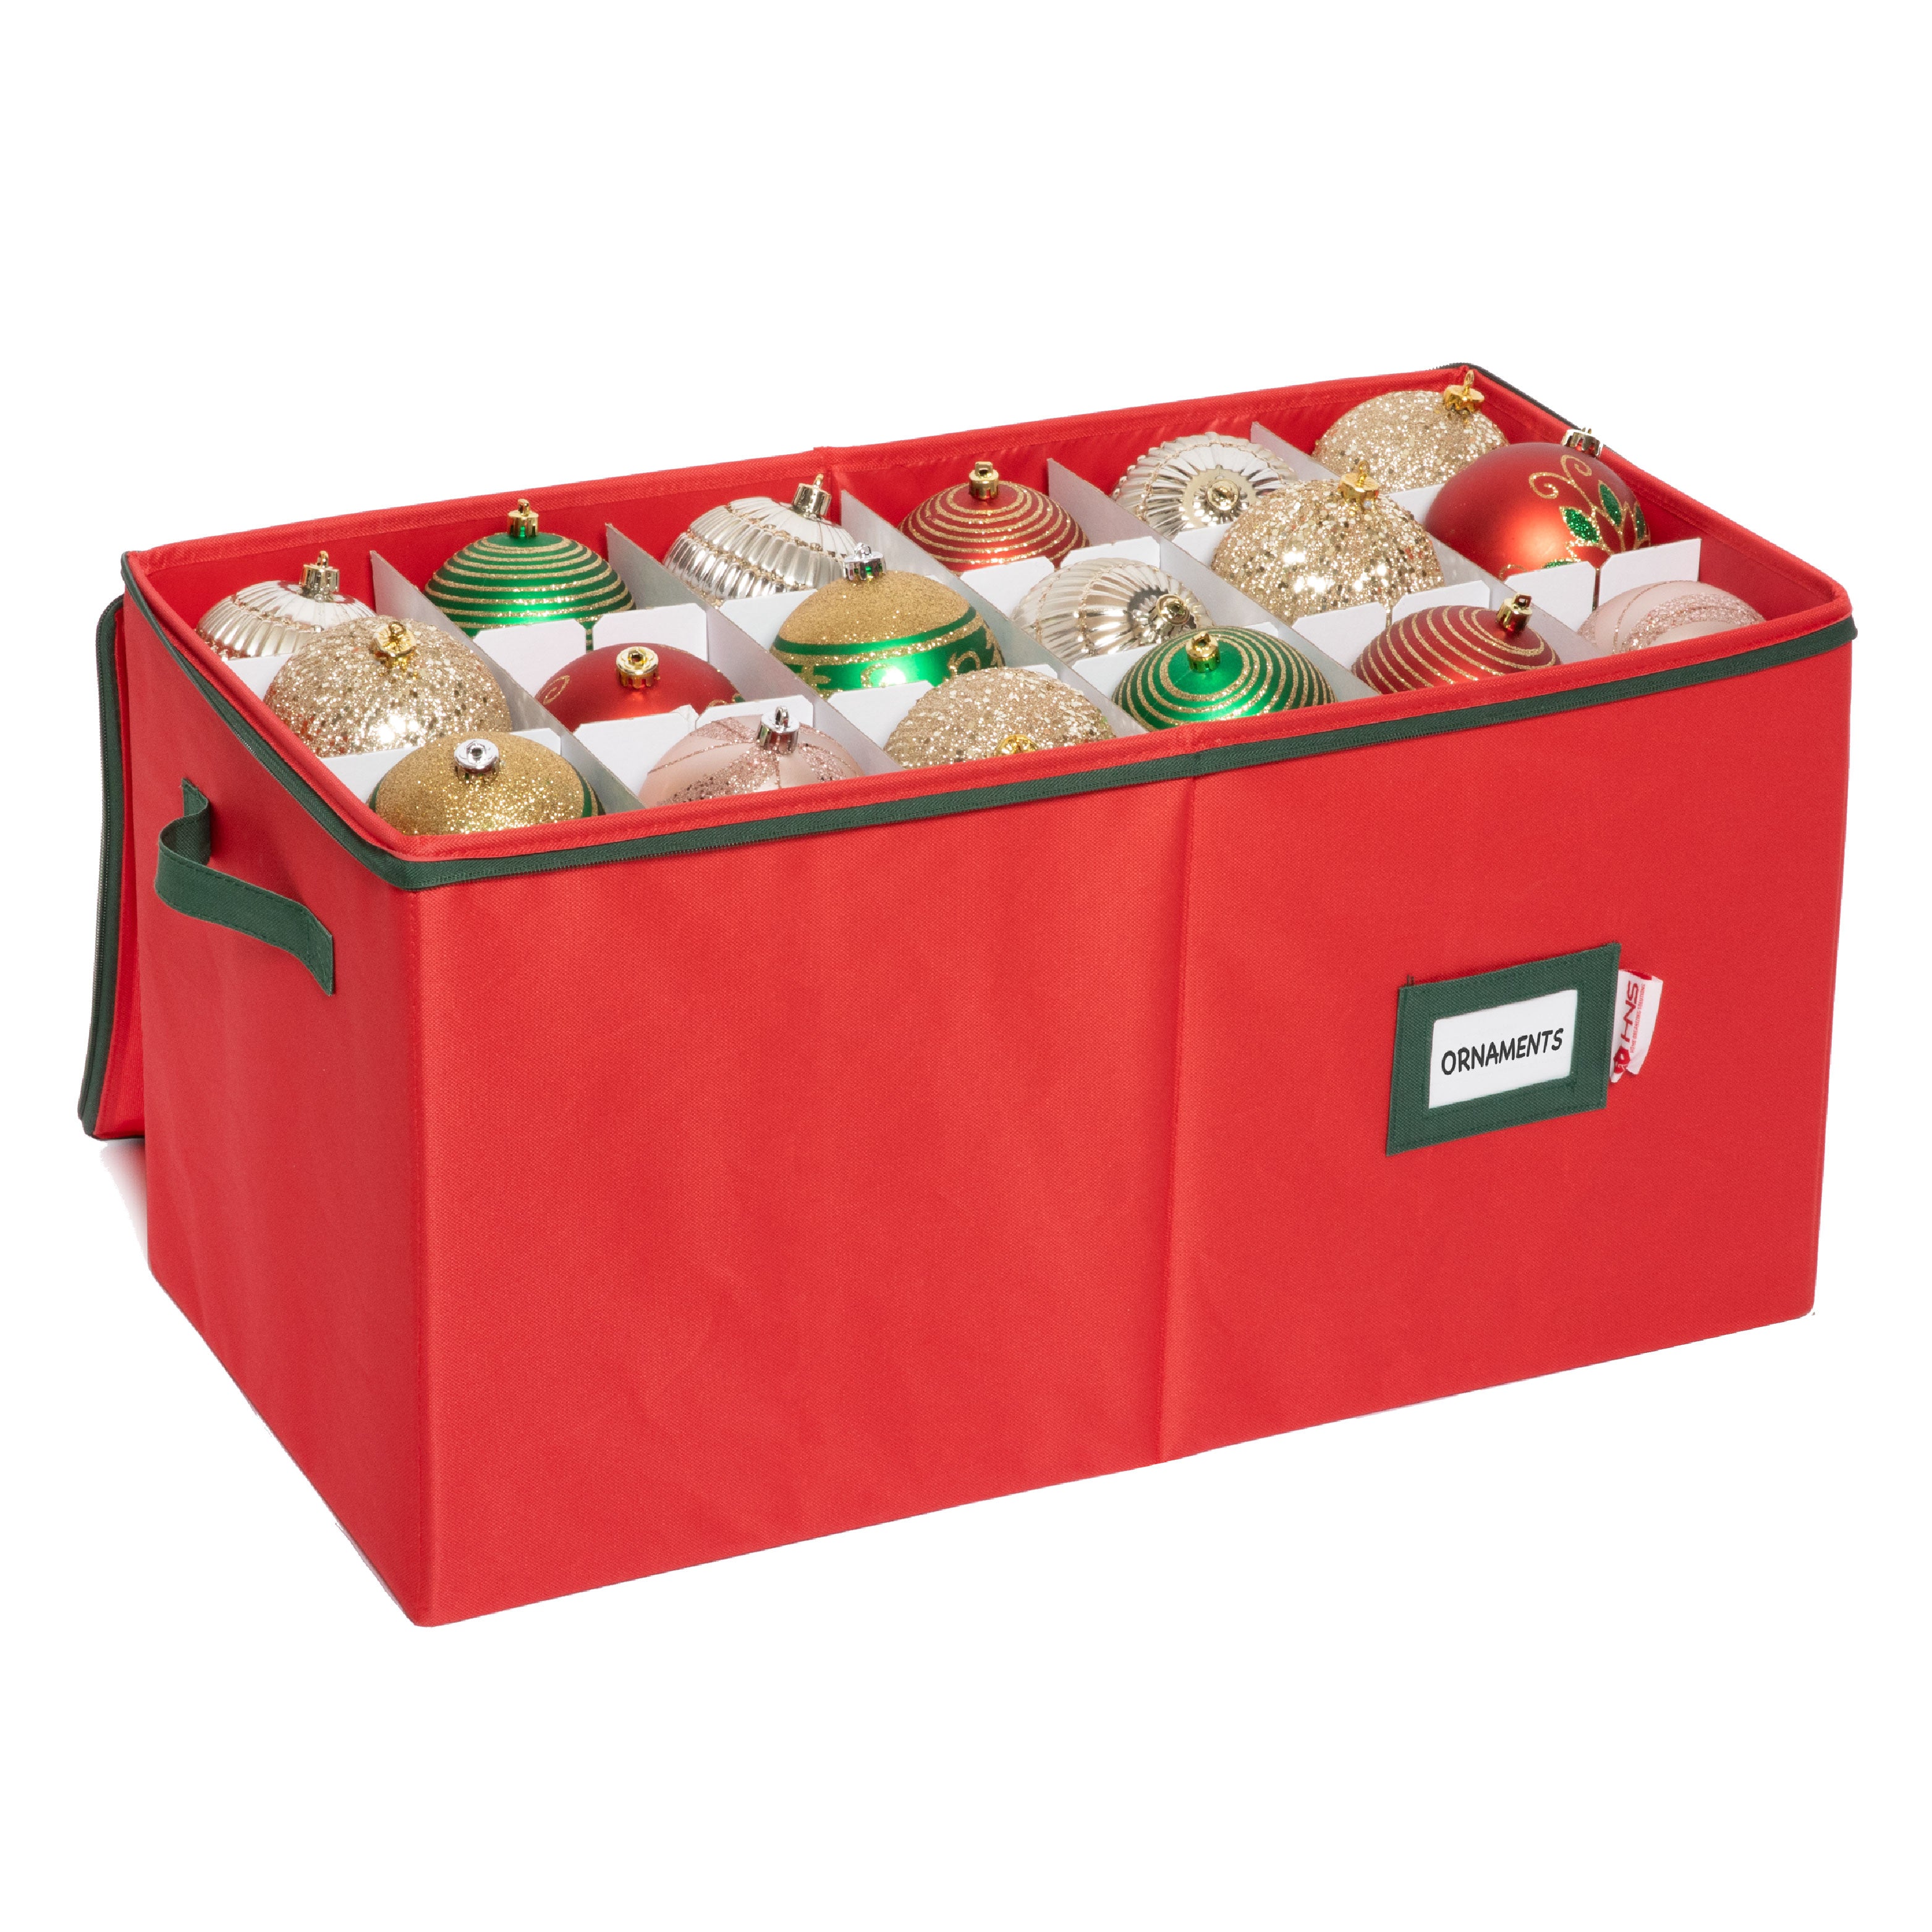 Christmas Ornament Storage Container with Dividers -Box Stores Up to 54 - 4" Ornaments, Convenient, Adjustable, Zippered, Heavy Duty 600D, Large Bin